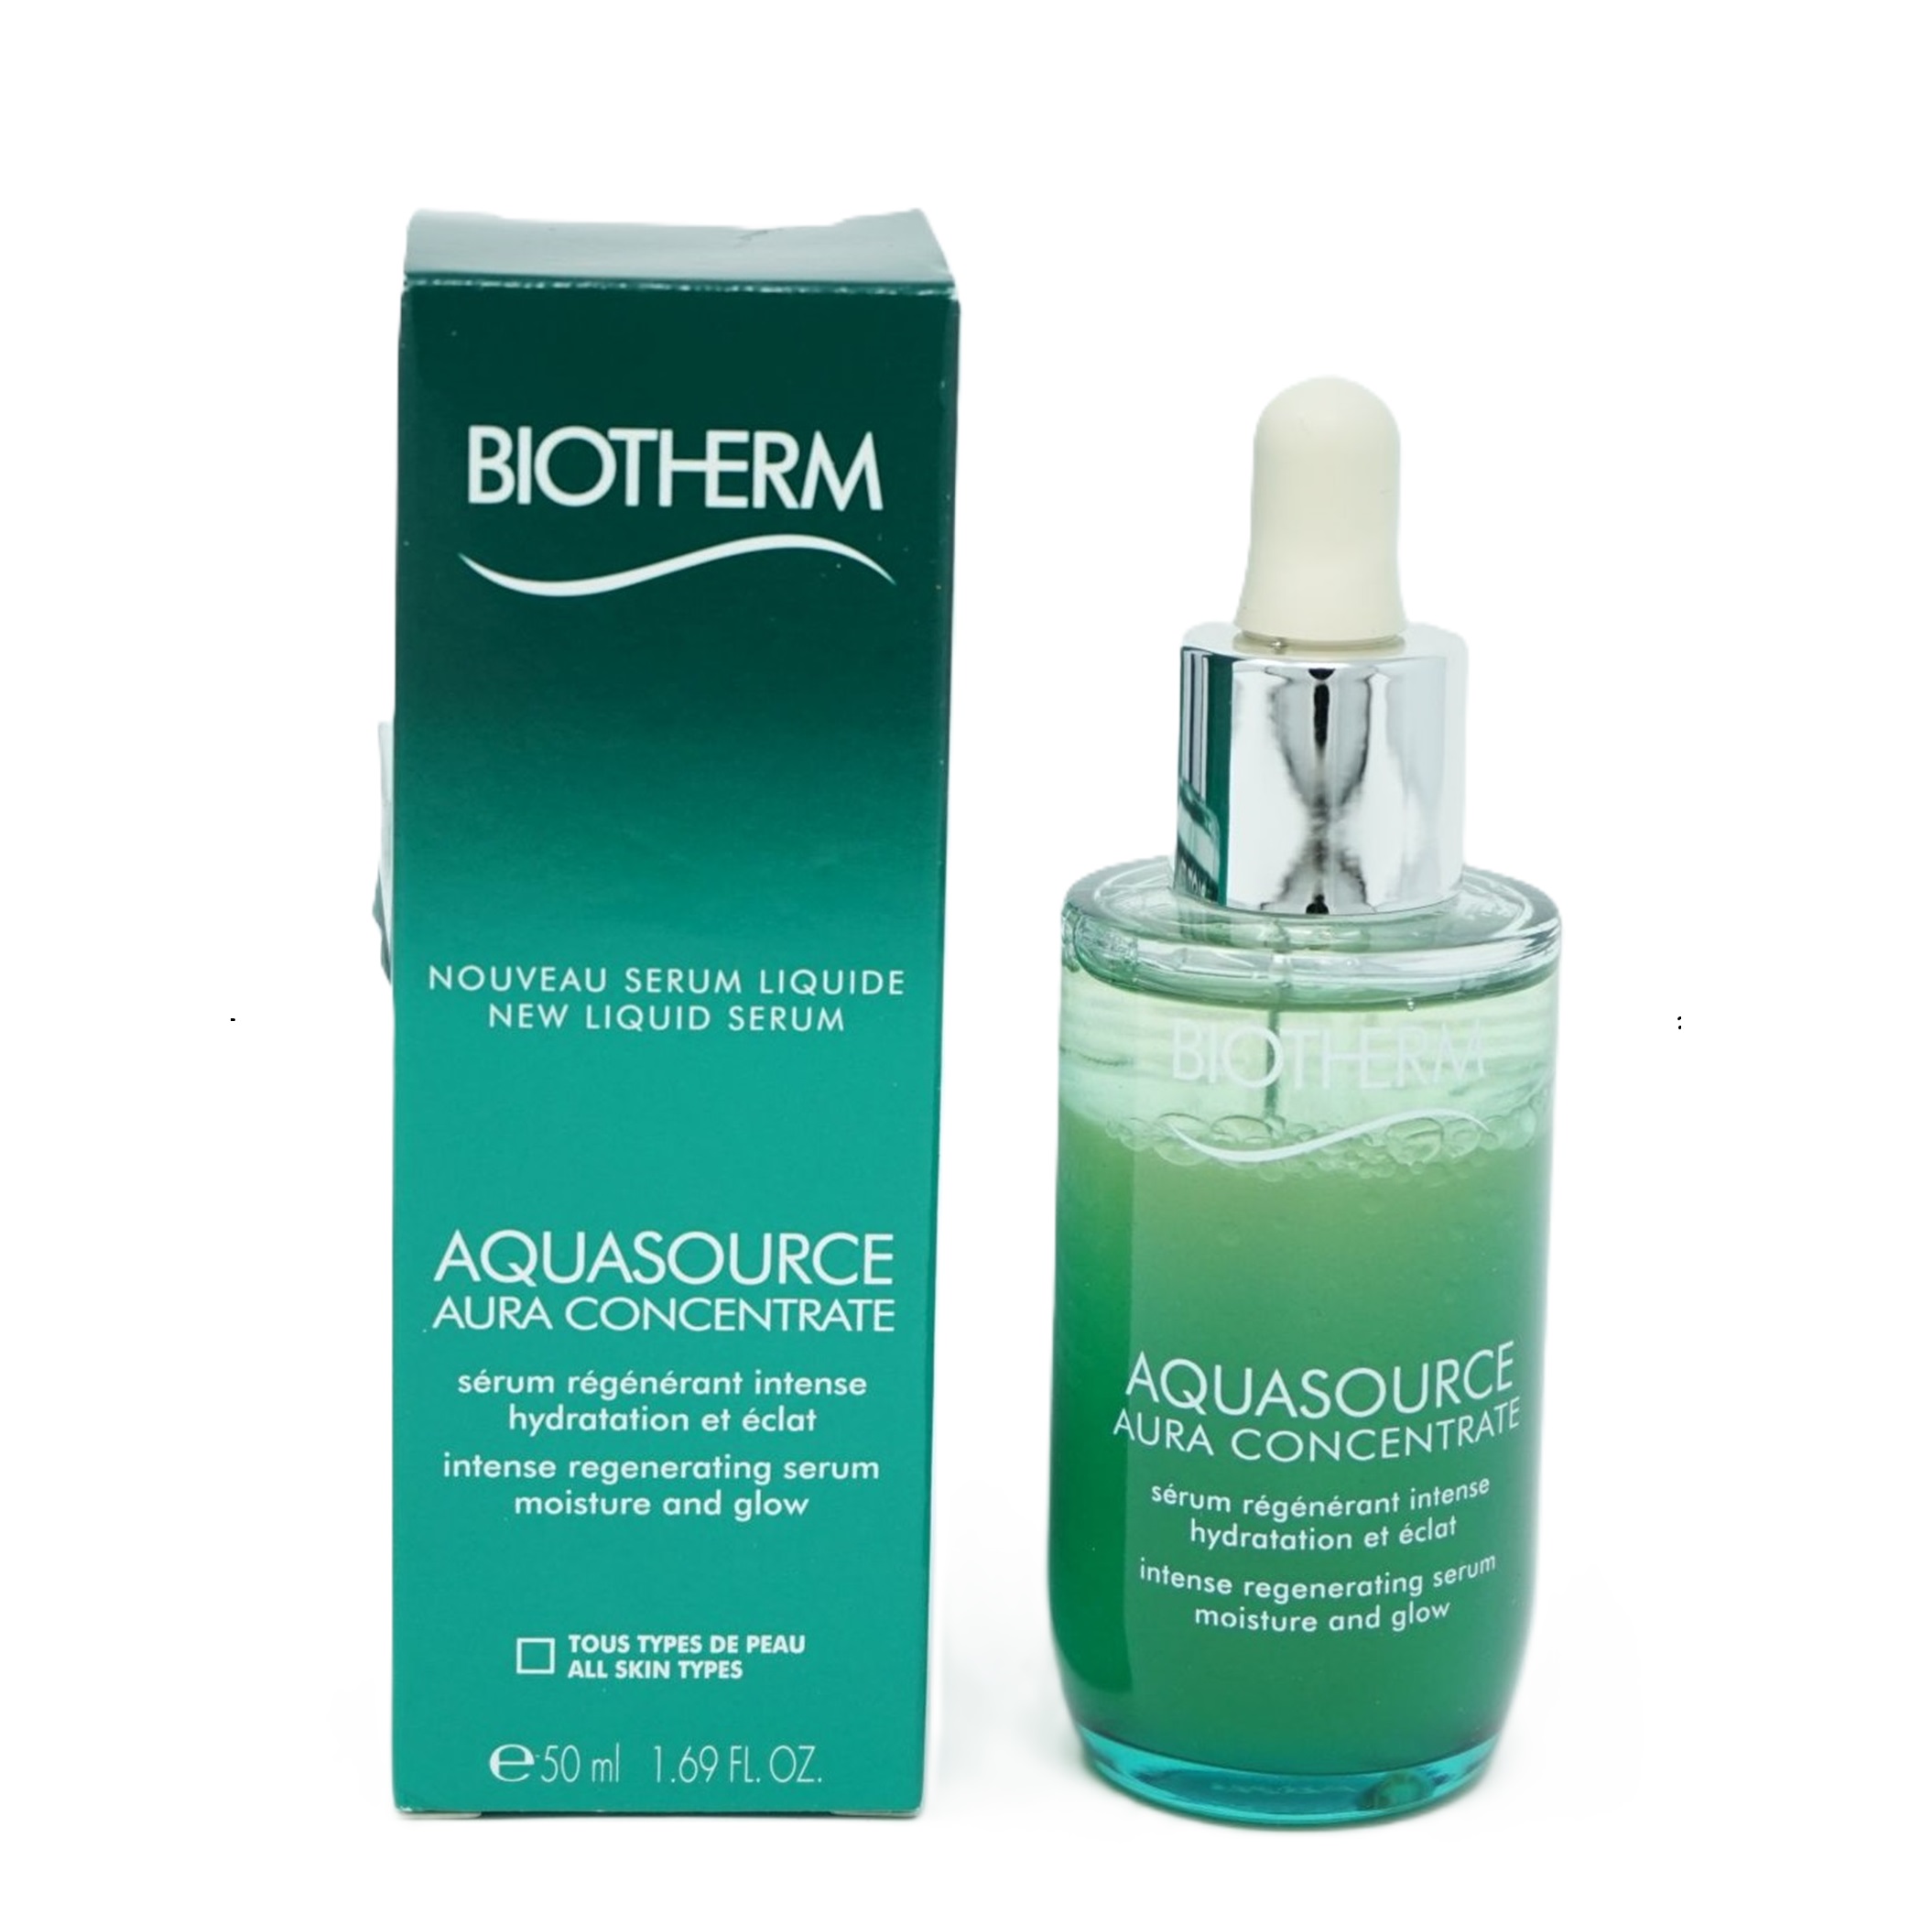 Biotherm Aquasource Aura Concentrate Moisture and glow Alle Hauttypen 50ml